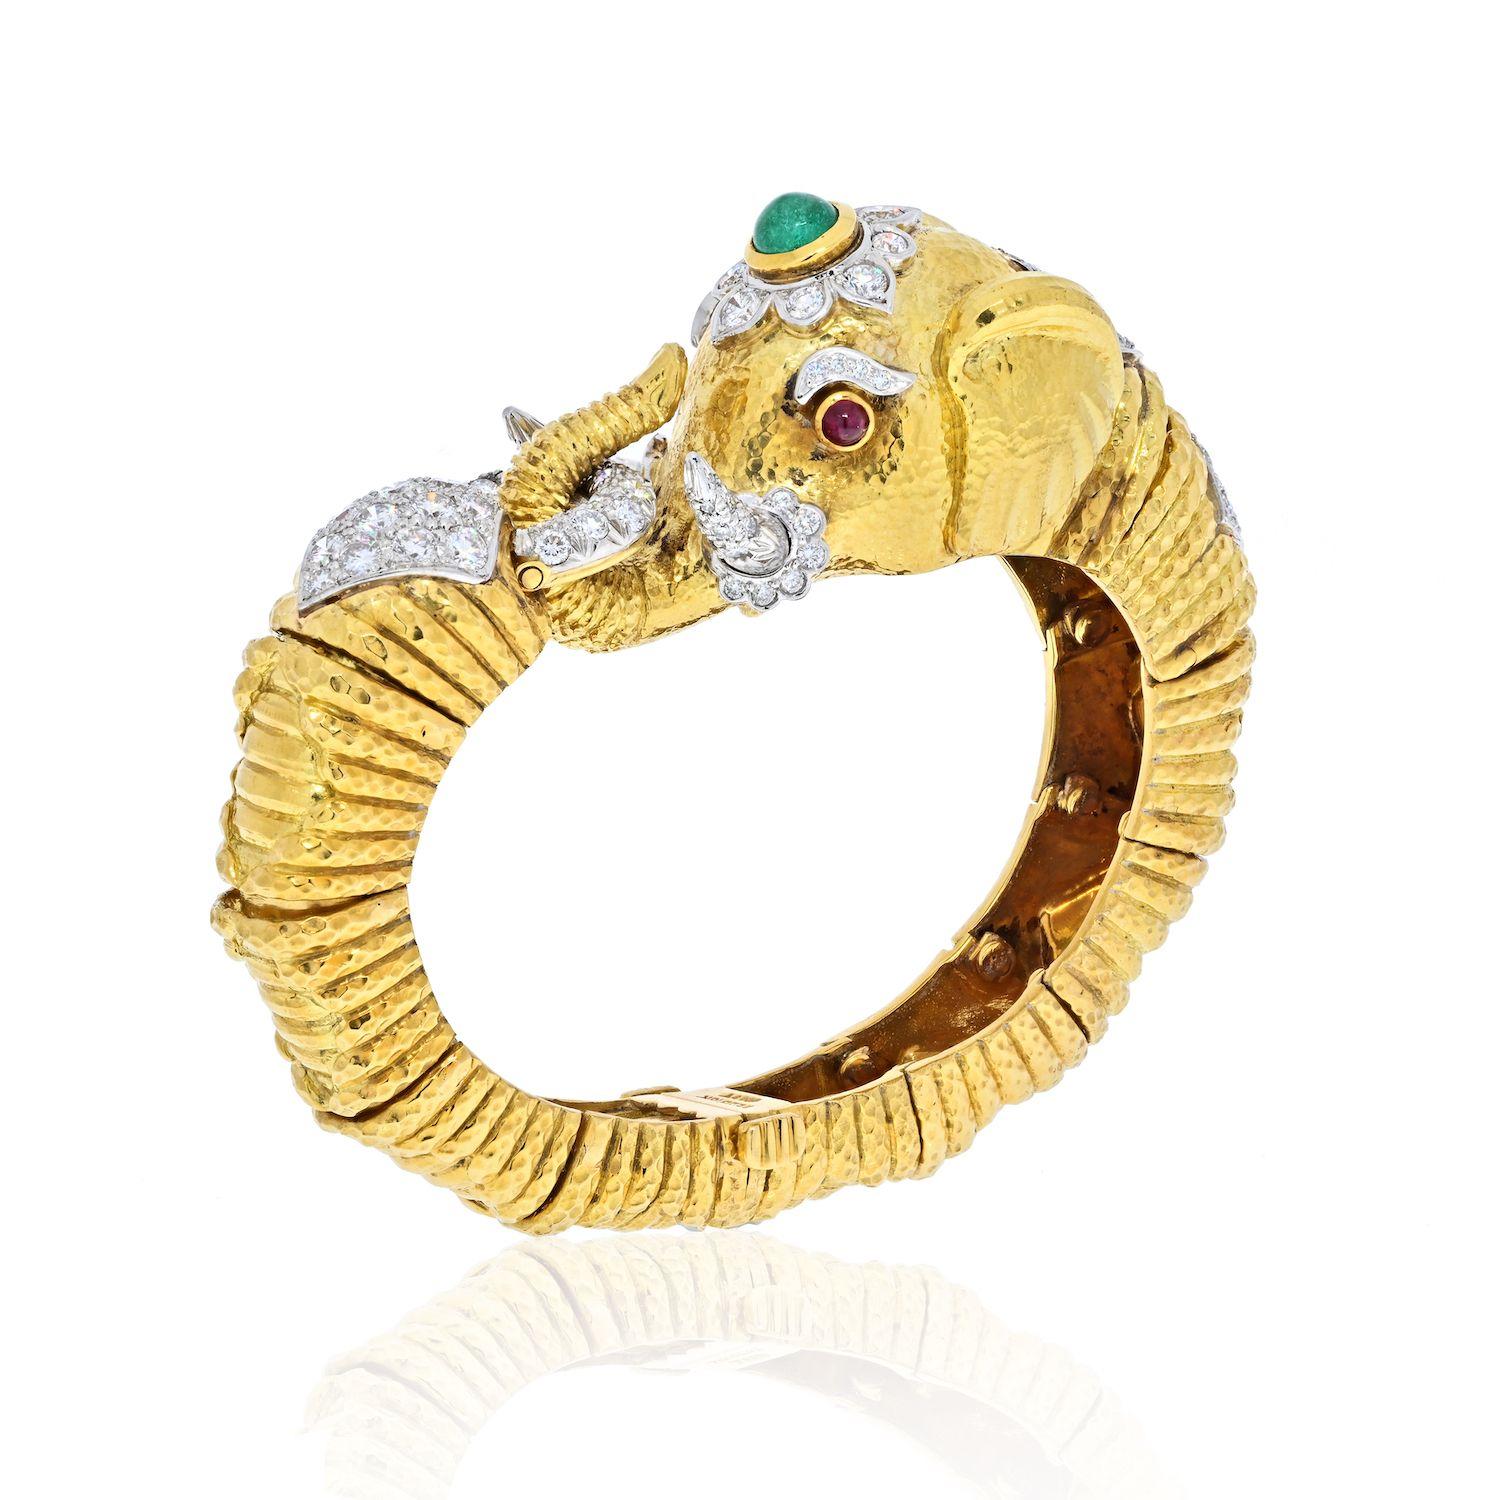 This fabulous and impressive bracelet is a re-take of David Webb#s famed Indian-inspired jewels of the 1920s. The 18k gold elephant set with beautiful diamonds and a green emerald a top his head and rubies as his eyes. 
Tap into your inner animal